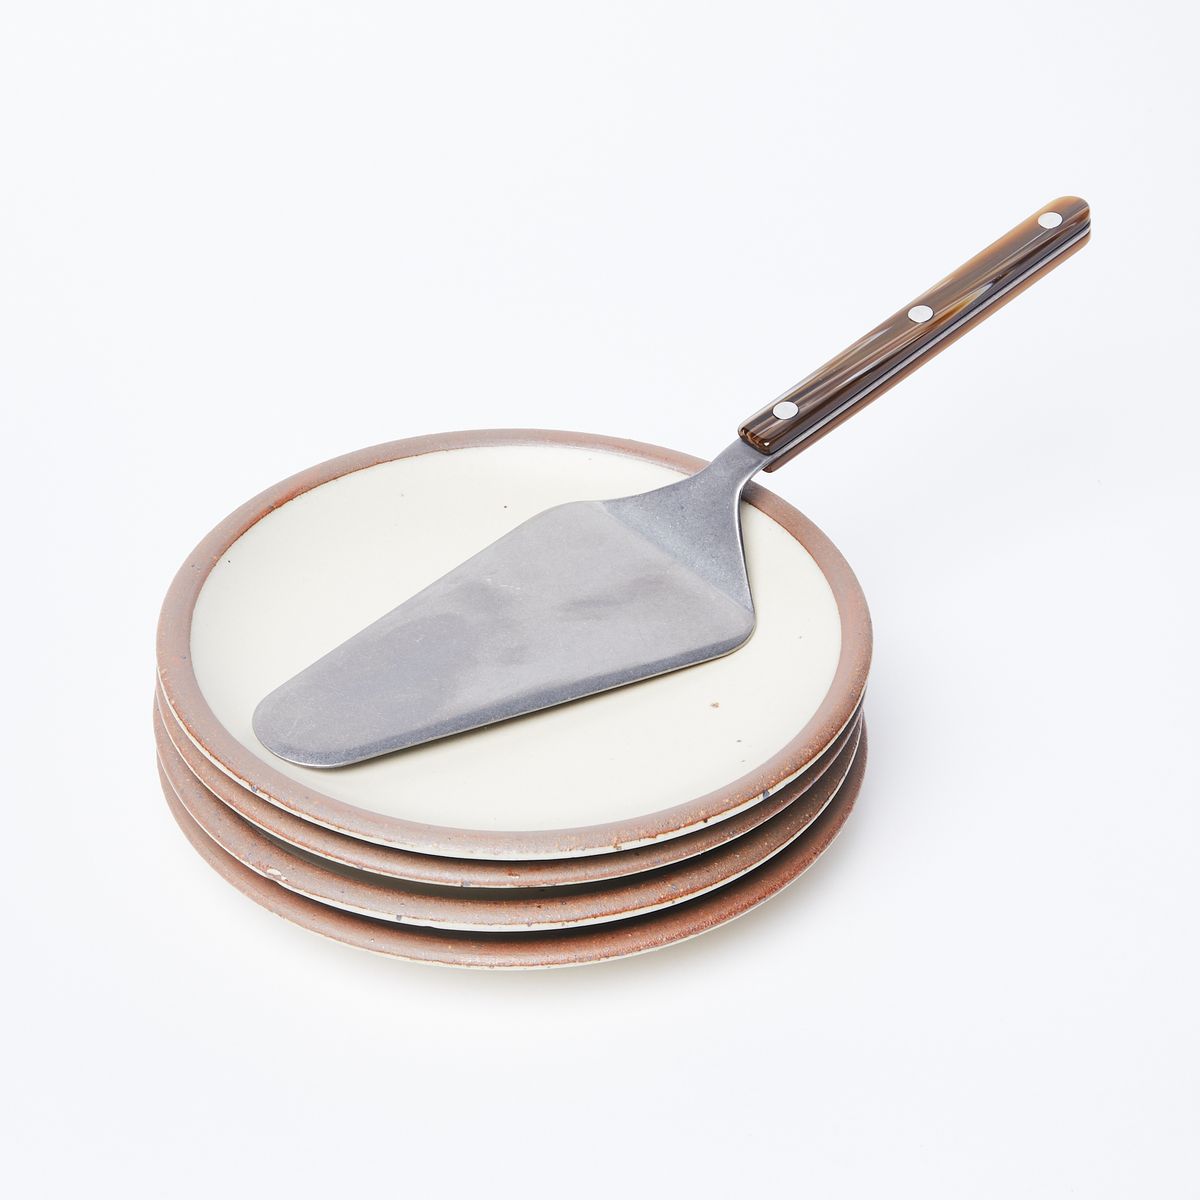 Silver Pie Server with a glossy brown handle with 3 silver circles on it sitting on top of a stack of 4 ceramic cake plates that are warm cream in color with a raw unglazed rim.